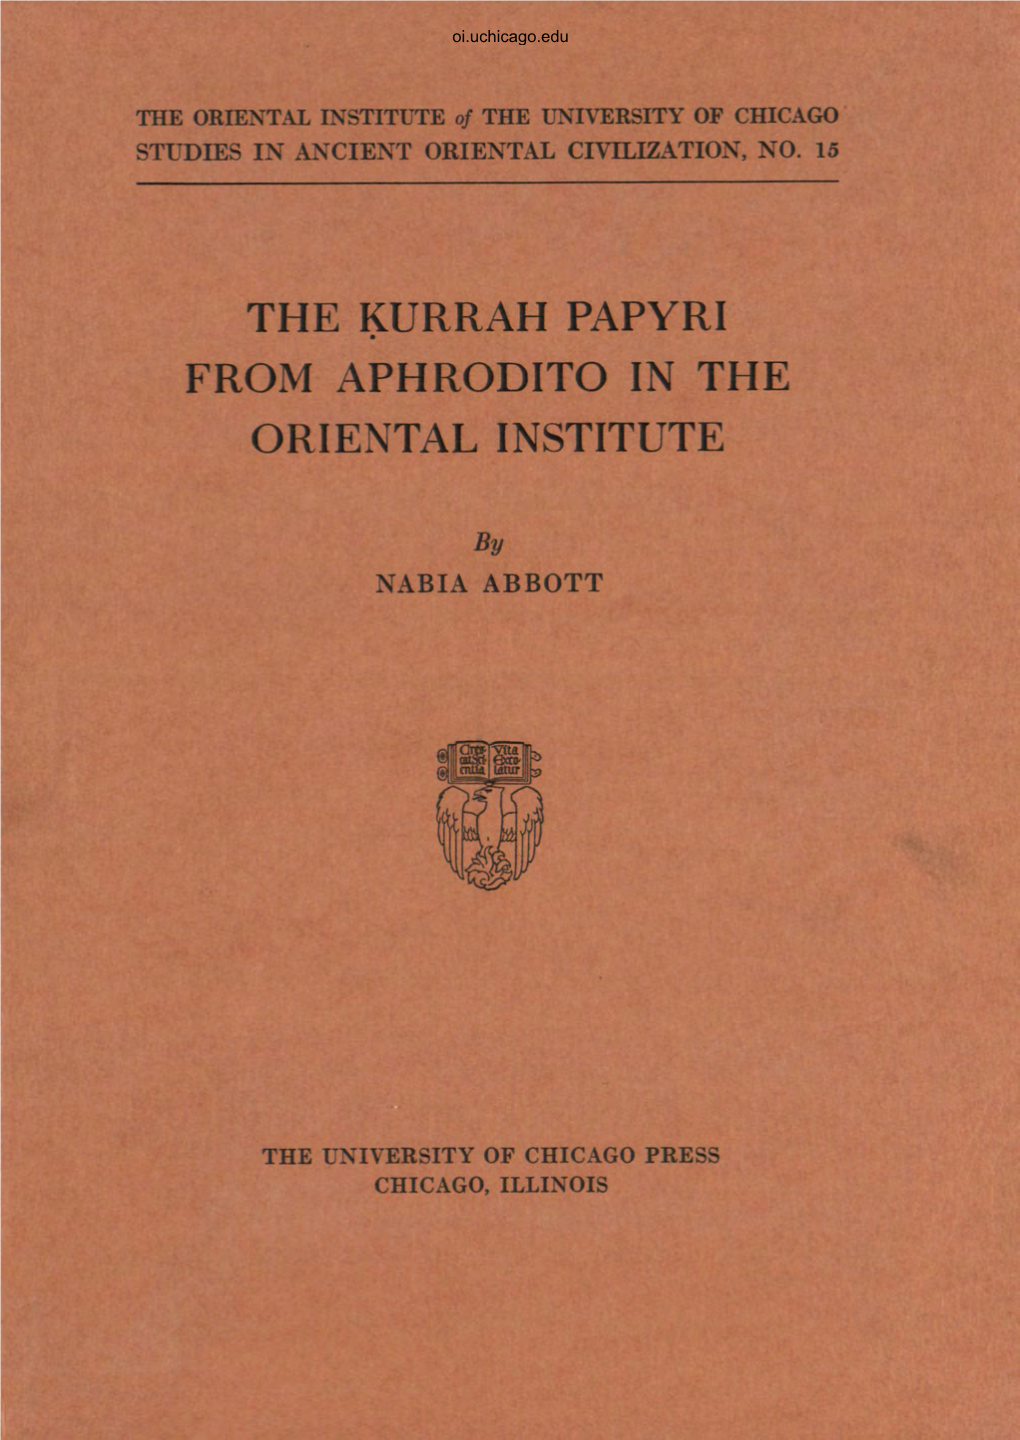 The Kurrah Papyri from Aphrodito in the Oriental Institute